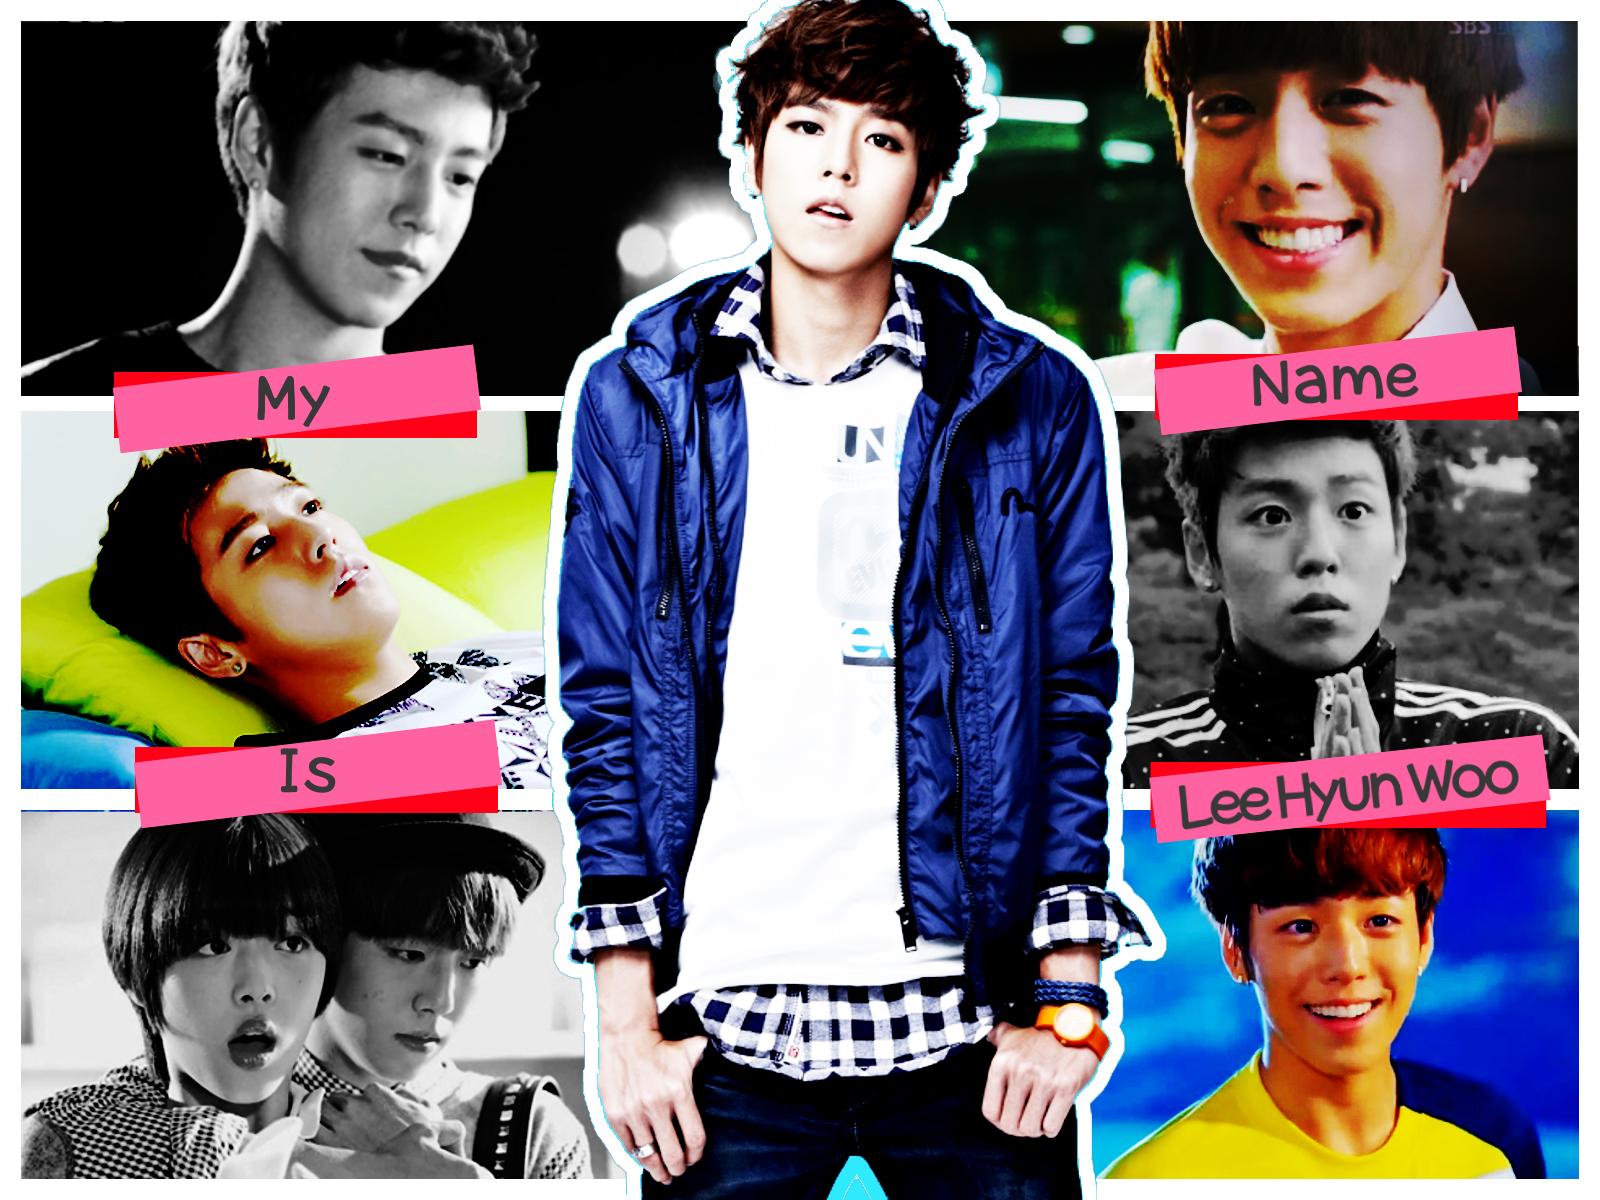 lee hyun woo wallpaper,facial expression,collage,product,cool,photomontage